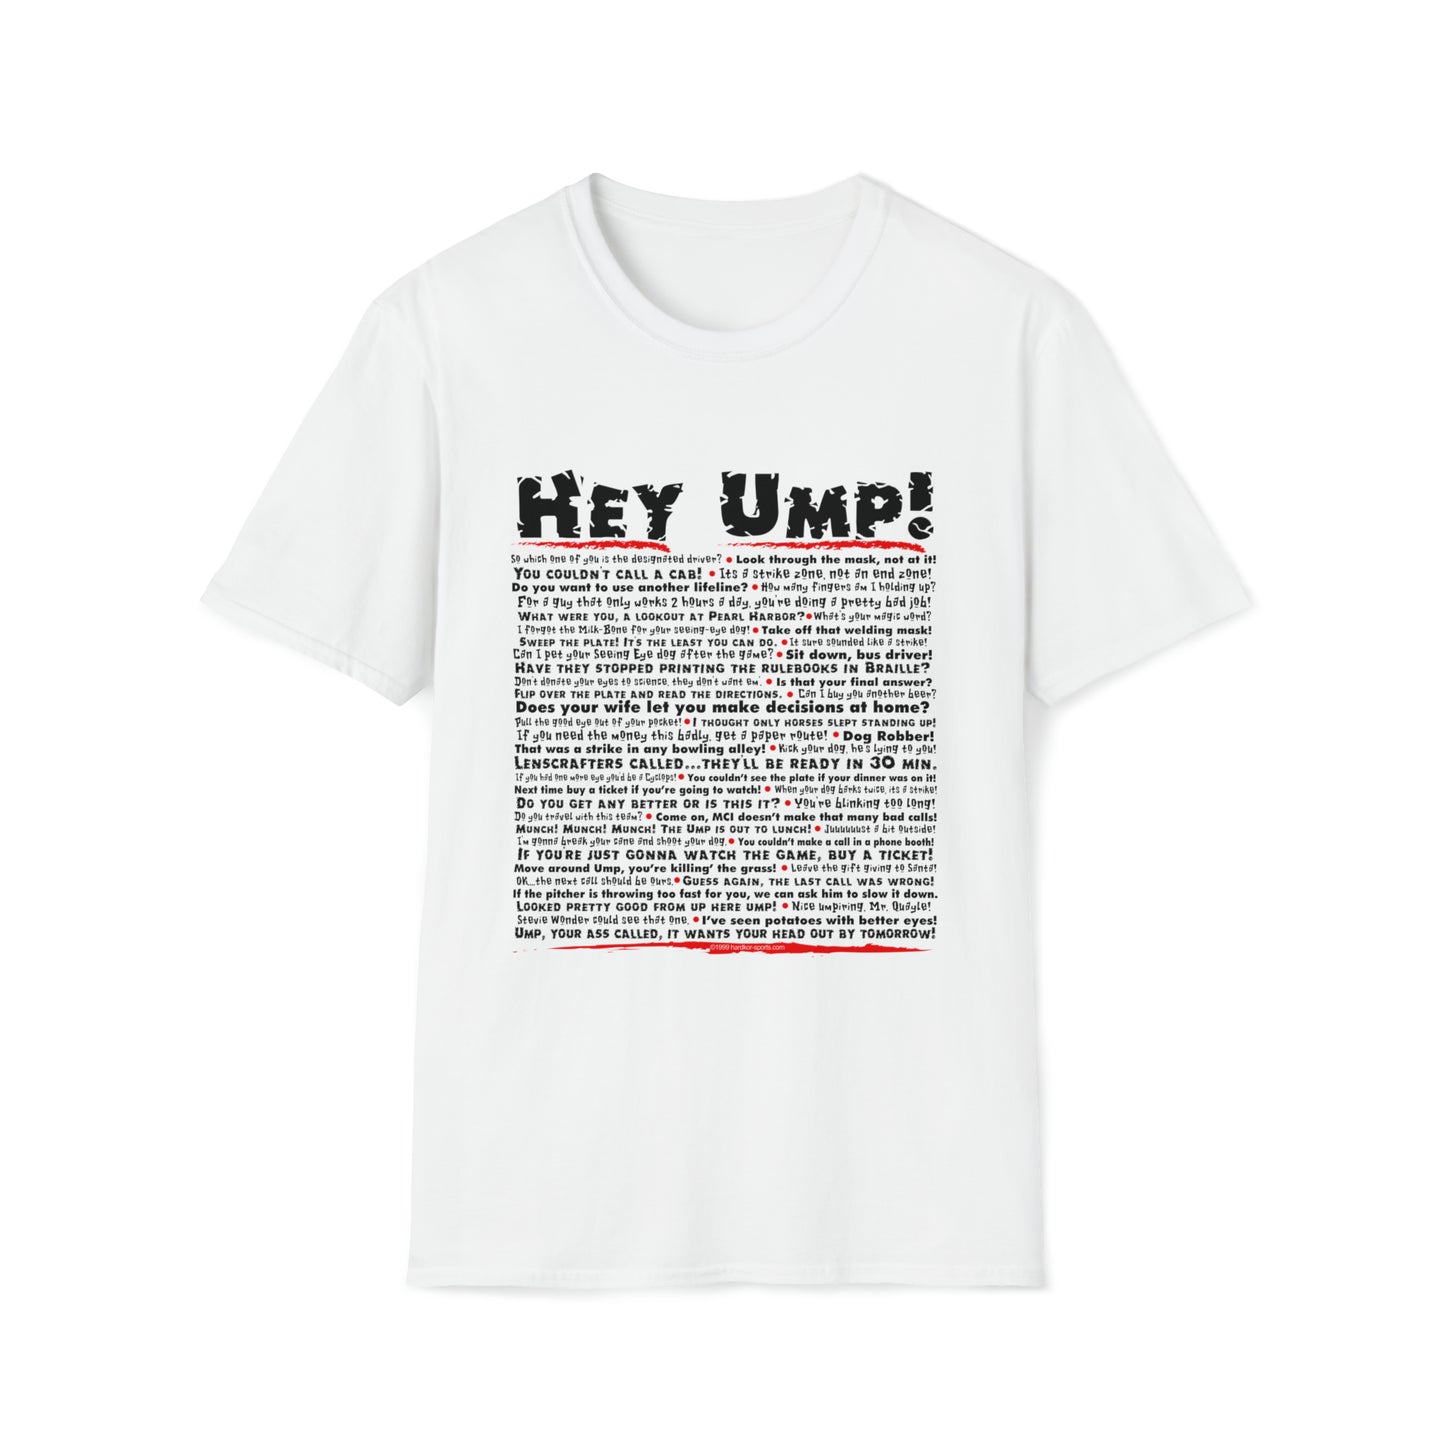 Hey Ump Funny Baseball T-Shirt, Humorous Insults and Jabs to Say to the Ump. White, Grey, Youth, Adult Umpire Humor Tee Shirt